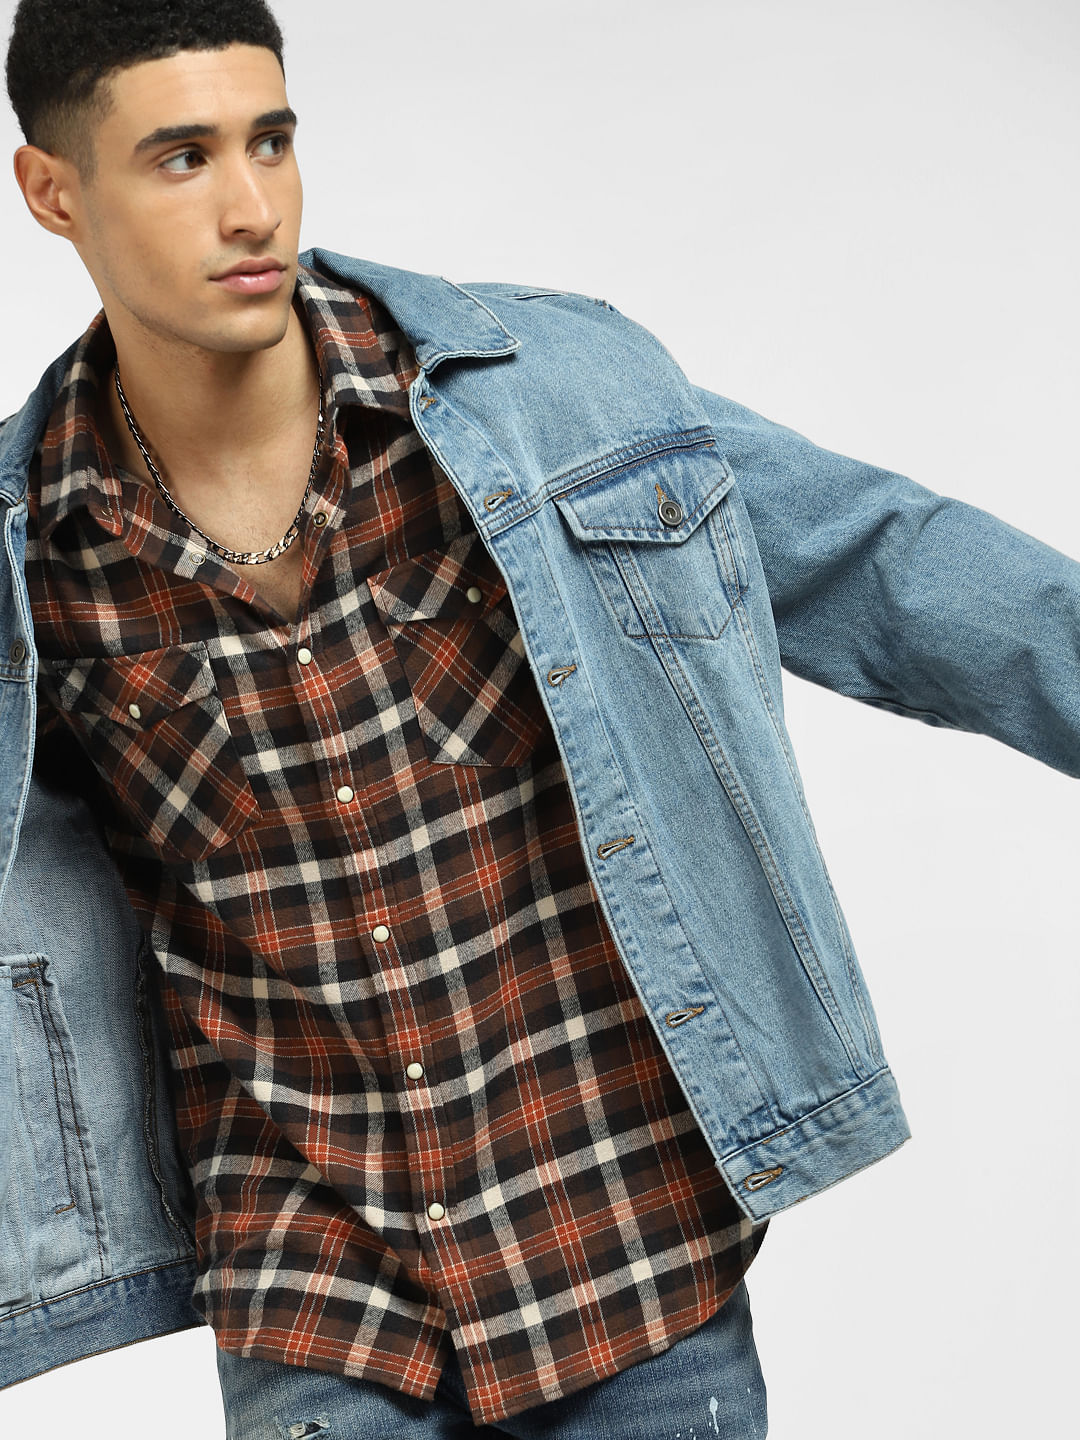 Weather is getting colder, Denim Jacket and Flannel Shirt a good combo? :  r/malefashionadvice